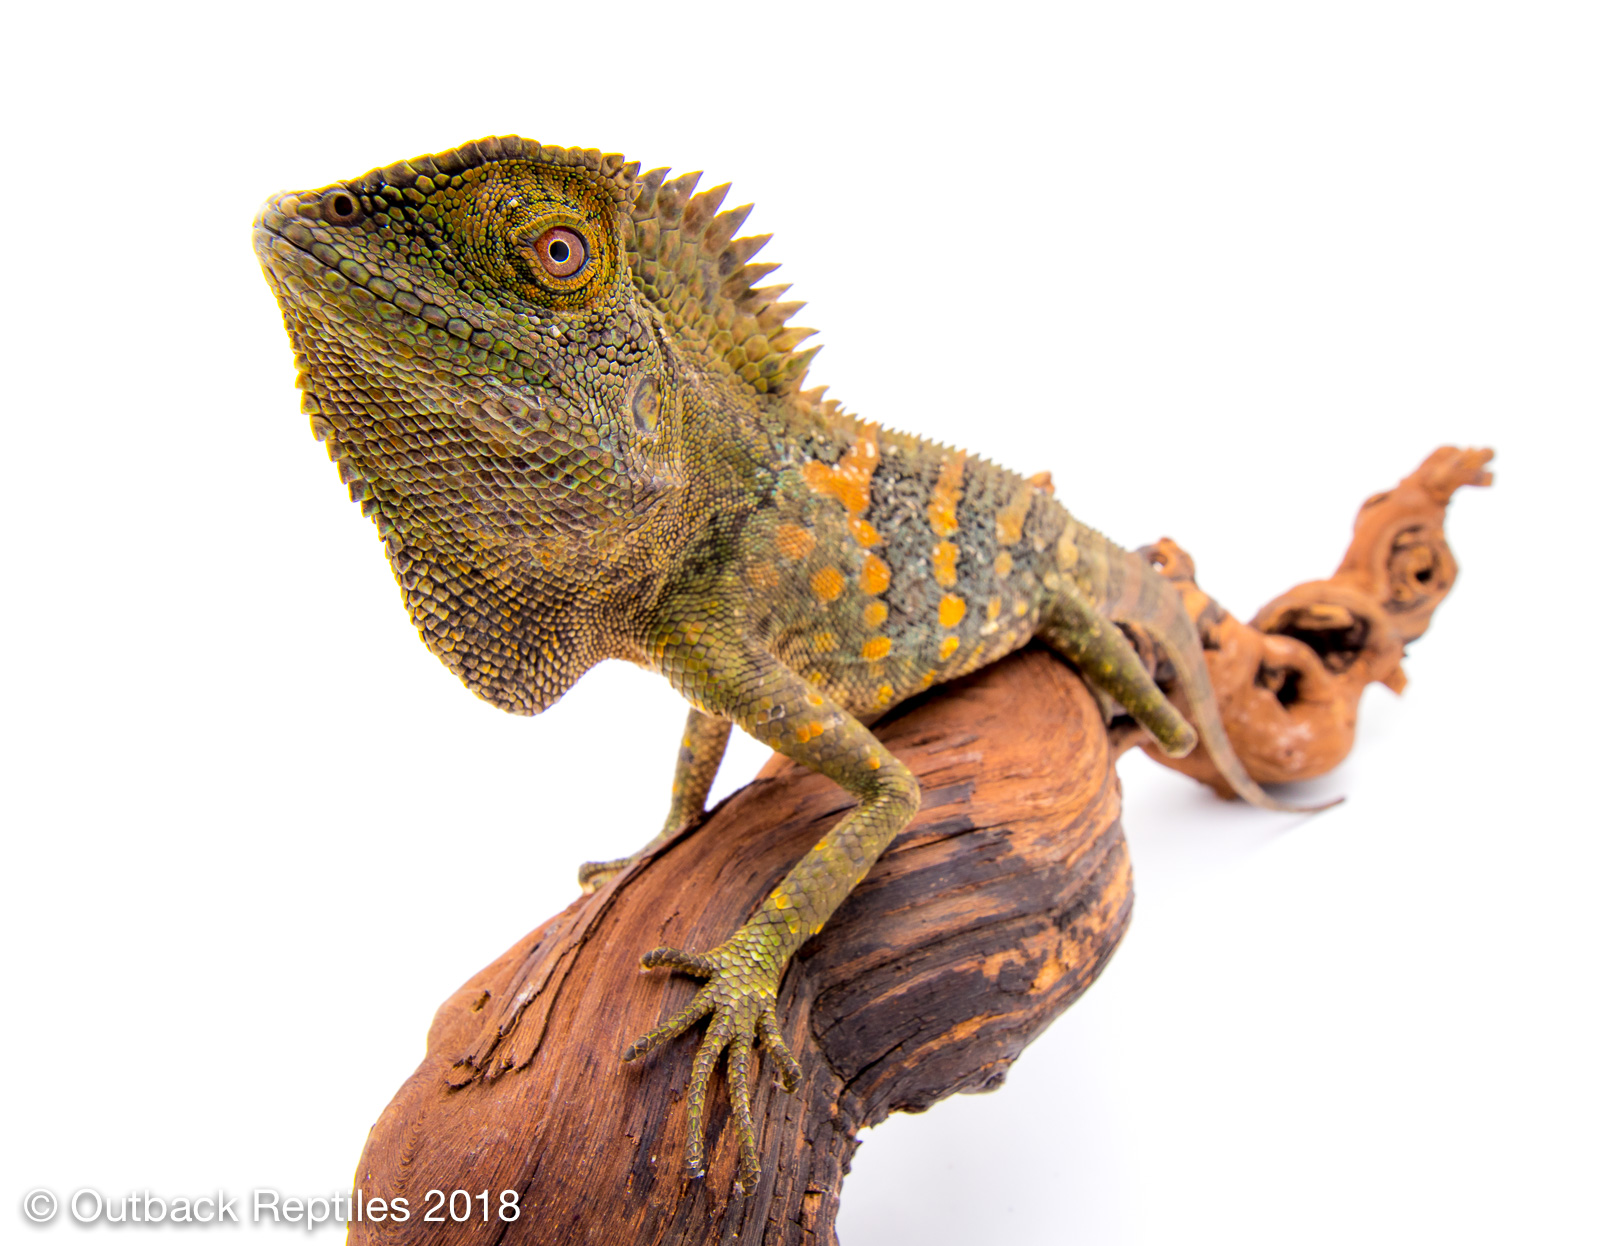 Wide Angle lens for reptile photography